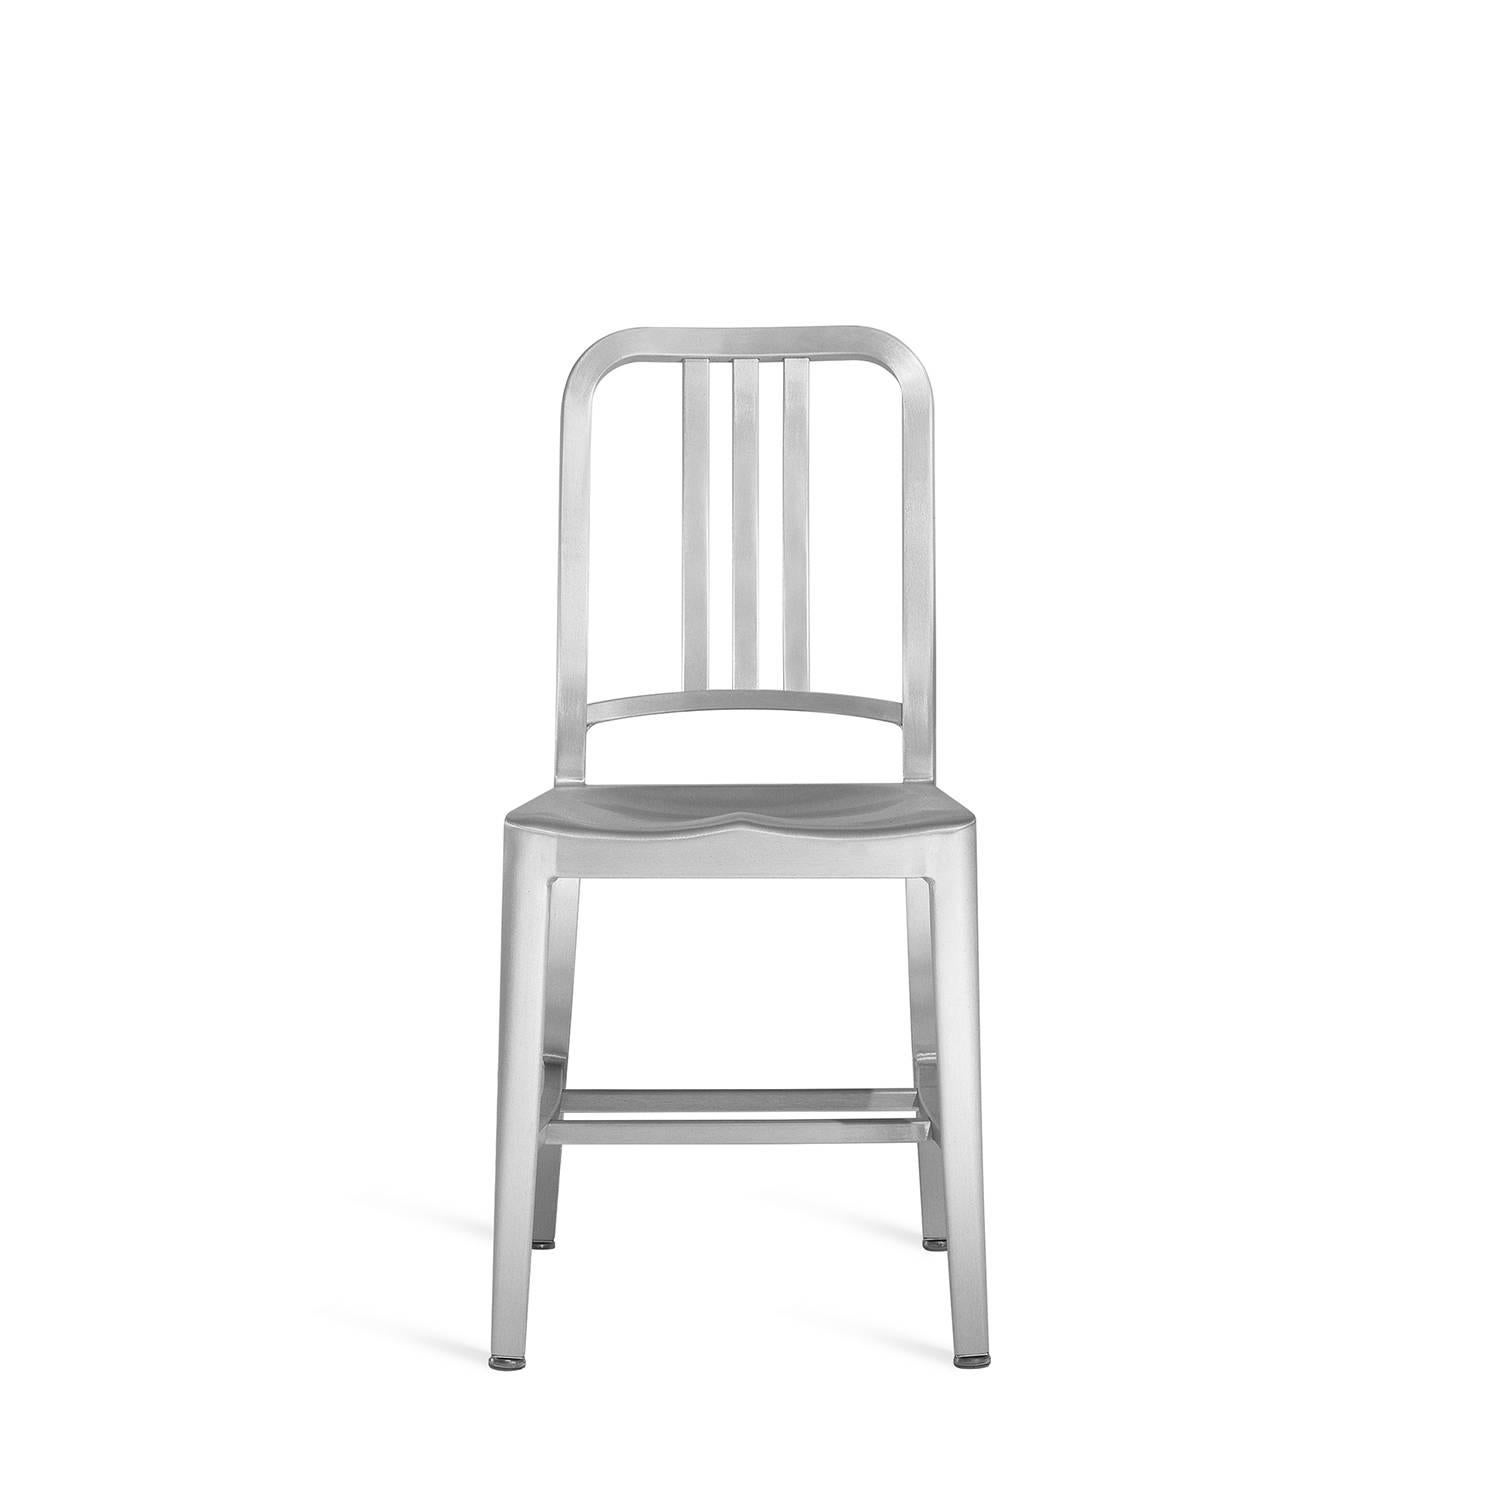 First built for use on submarines in 1944, the Navy Chair has been in continuous Production ever since. With the famous 77 step Process, our craftsmen take soft, recycled aluminum, hand form and weld it- then temper it for strength. Finally, the